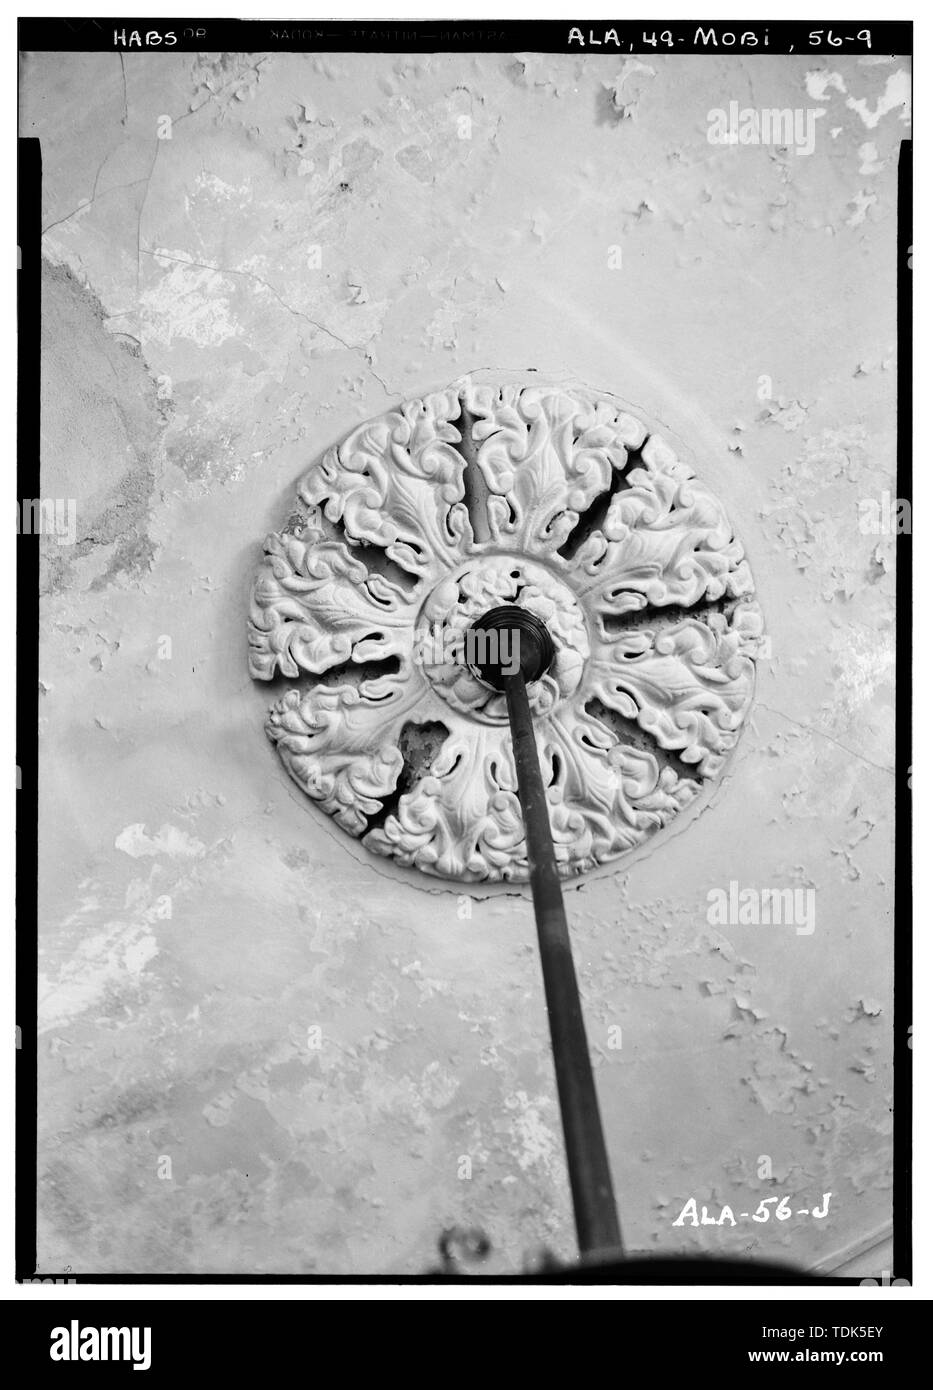 Historic American Buildings Survey E. W. Russell, Photographer, March 24, 1936 ORNAMENTAL PLASTER ROSETTE (CEILING OF HALL) 1st FLOOR) - Horta-Semmes House and Fence, 802 Government Street, Mobile, Mobile County, AL Stock Photo